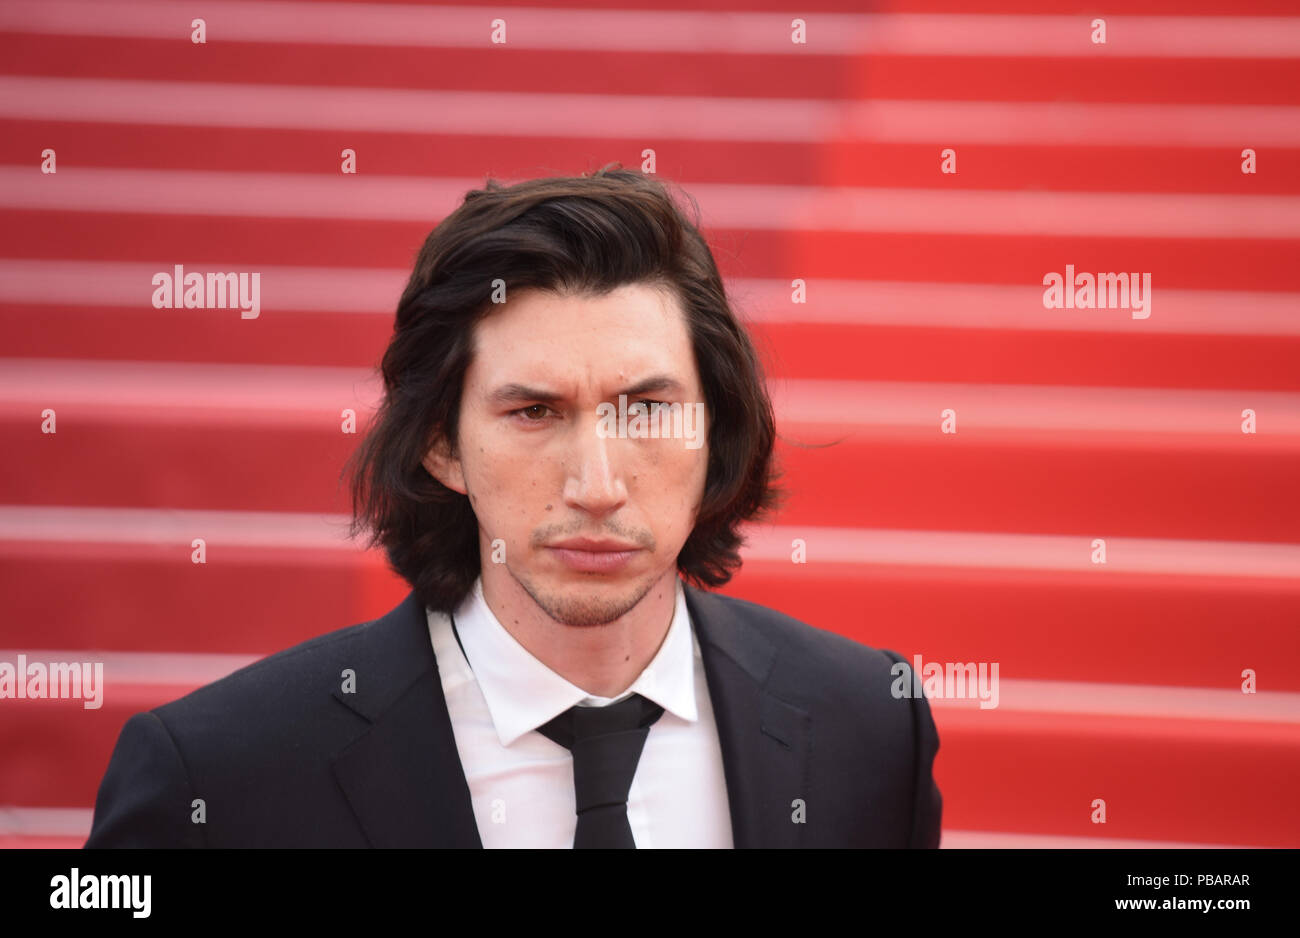 May 16, 2016 - Cannes, France: Adam Driver attends the 'Paterson' premiere during the 69th Cannes film festival.  Adam Driver lors du 69eme Festival de Cannes. *** FRANCE OUT / NO SALES TO FRENCH MEDIA *** Stock Photo